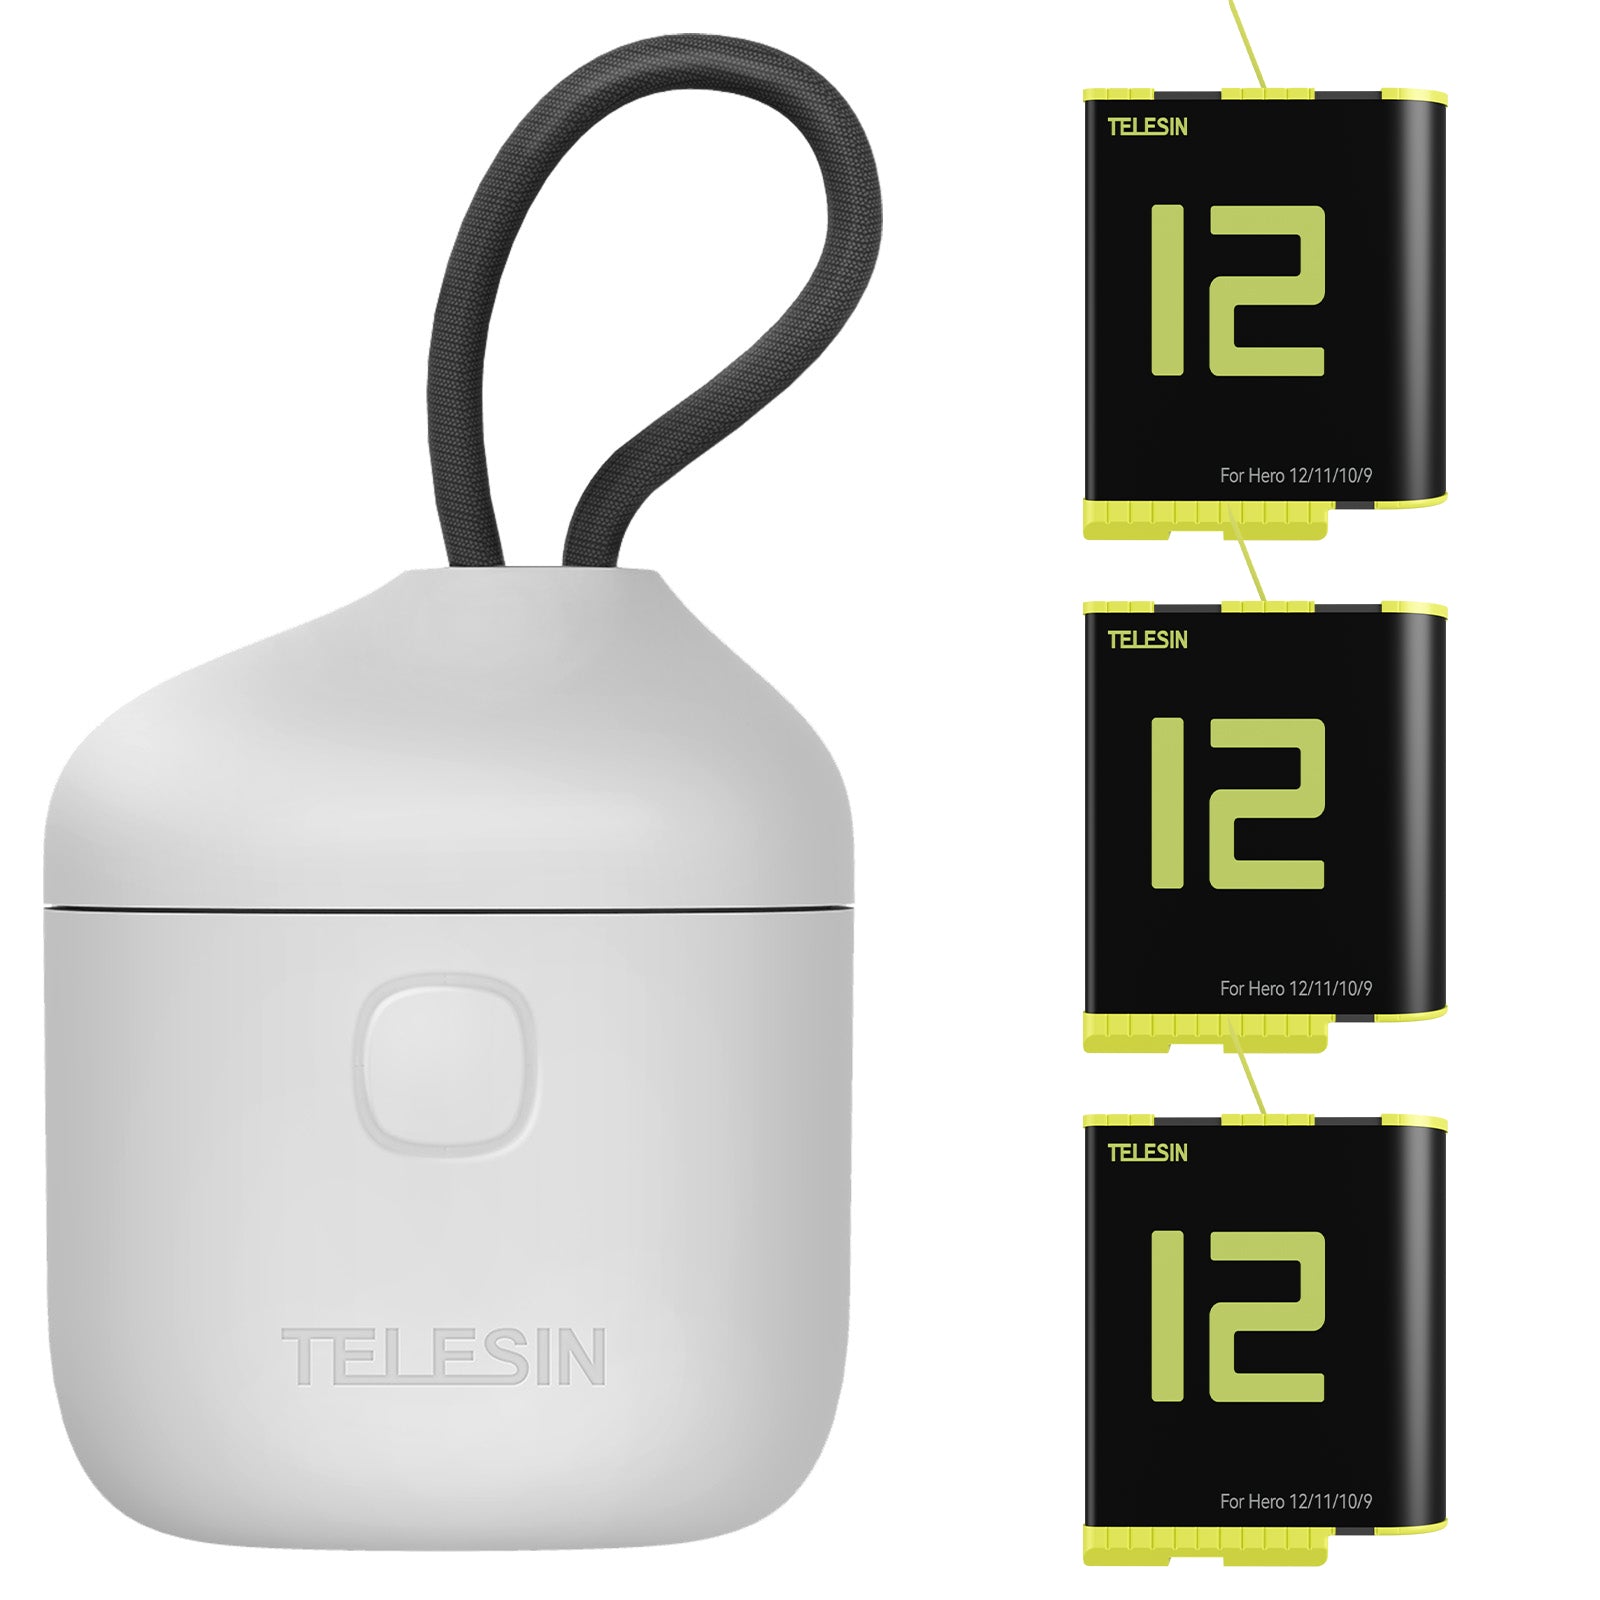 TELESIN Charger with Batteries for GoPro 12/11/10/9